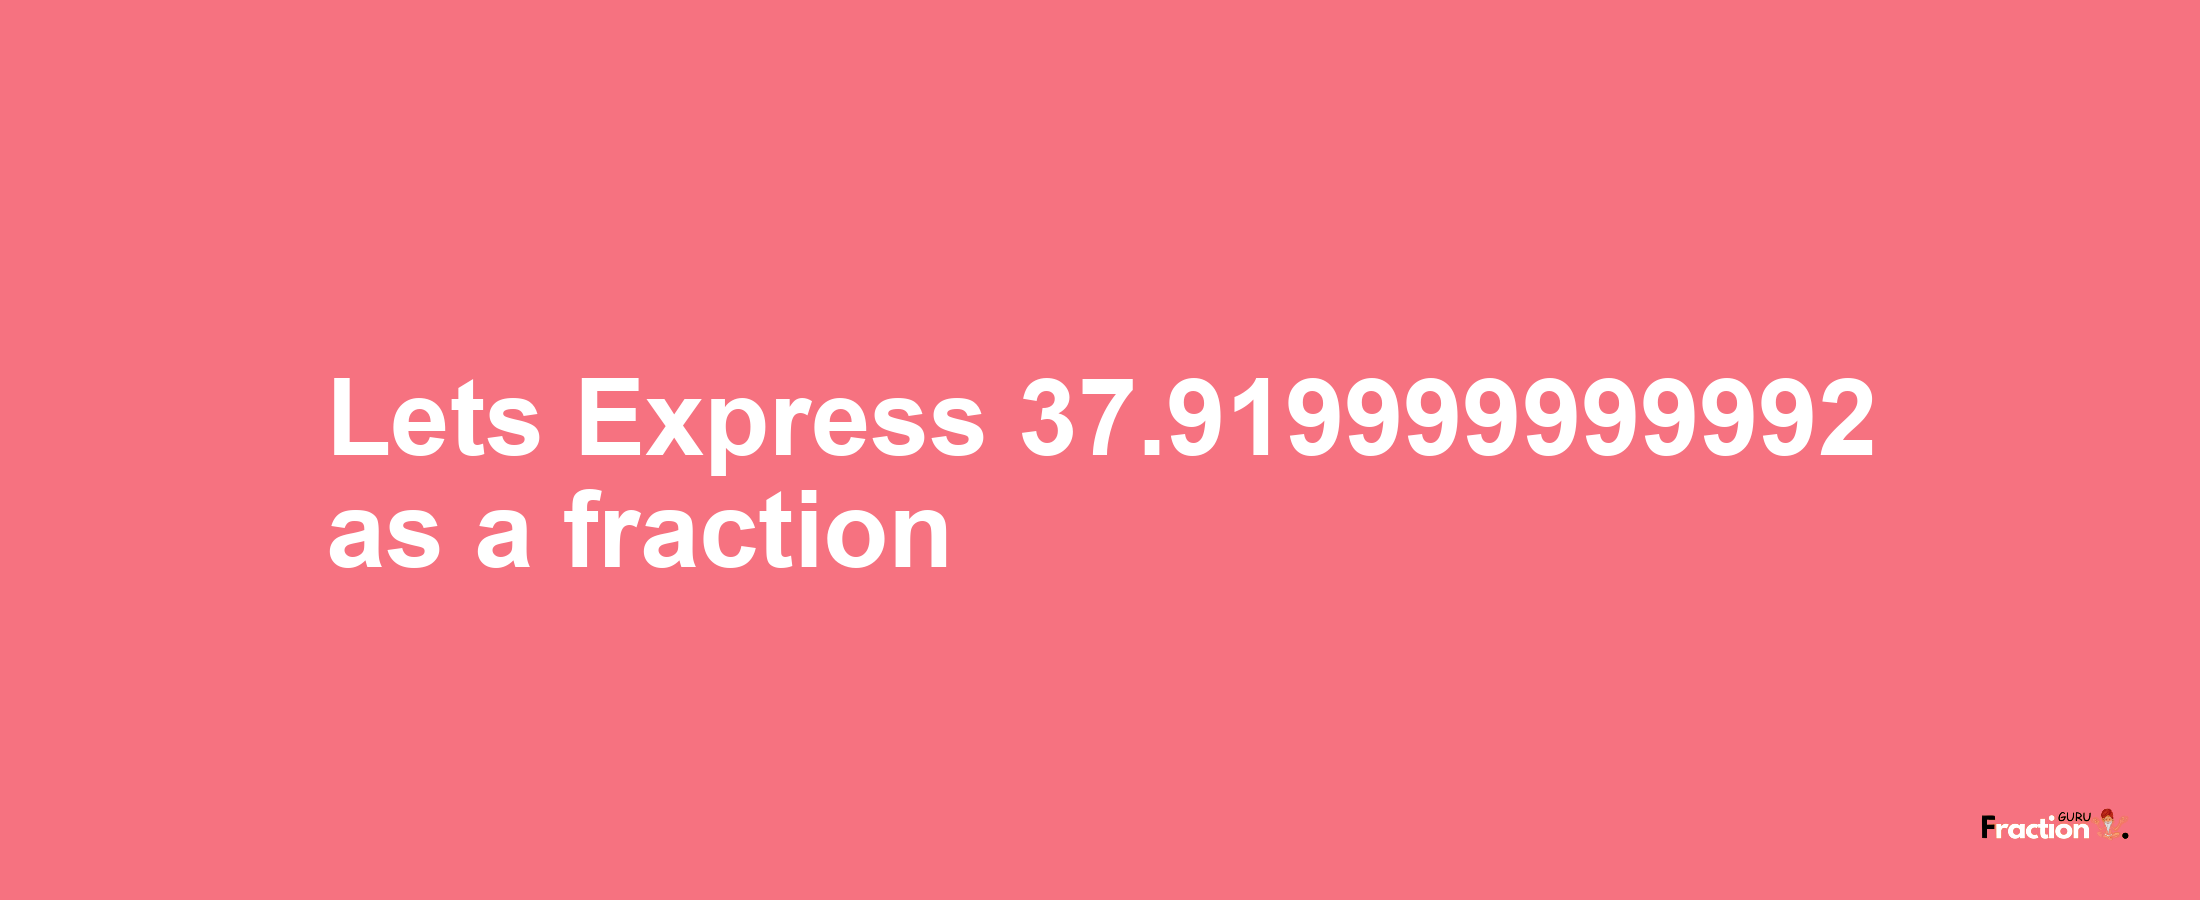 Lets Express 37.919999999992 as afraction